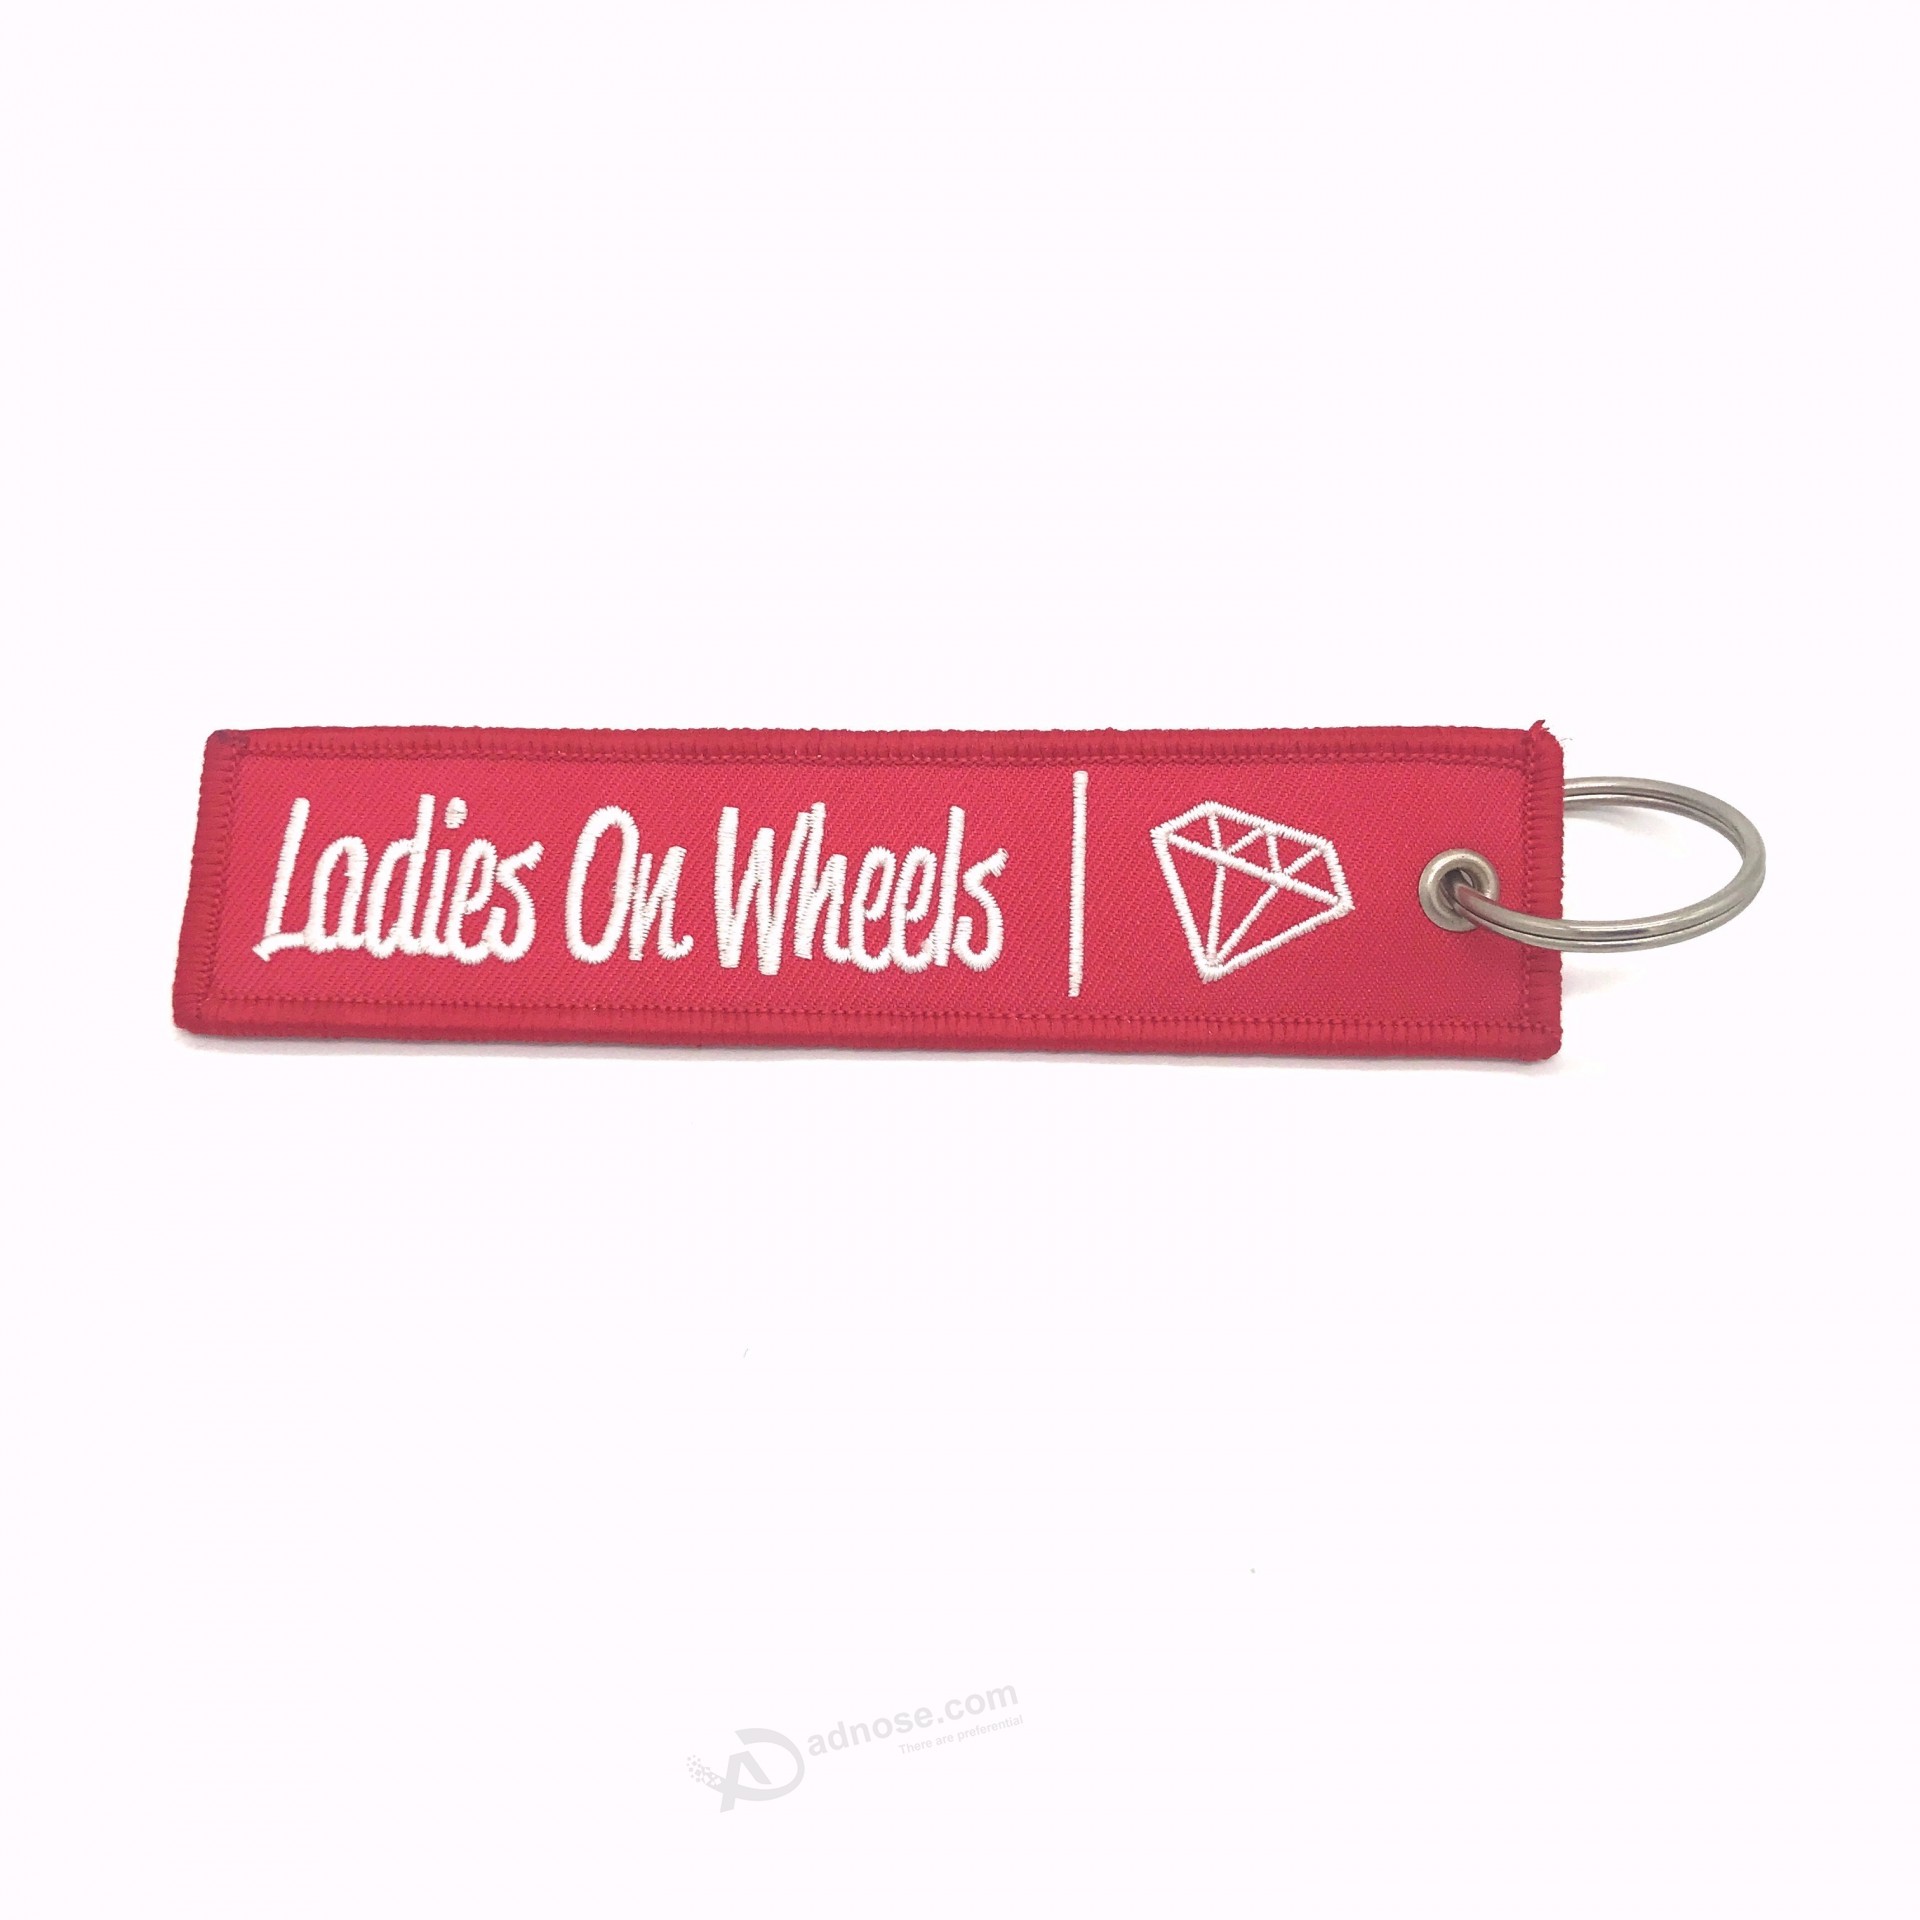 twill polyester fabric woven key chain jet tag for promotion marketing